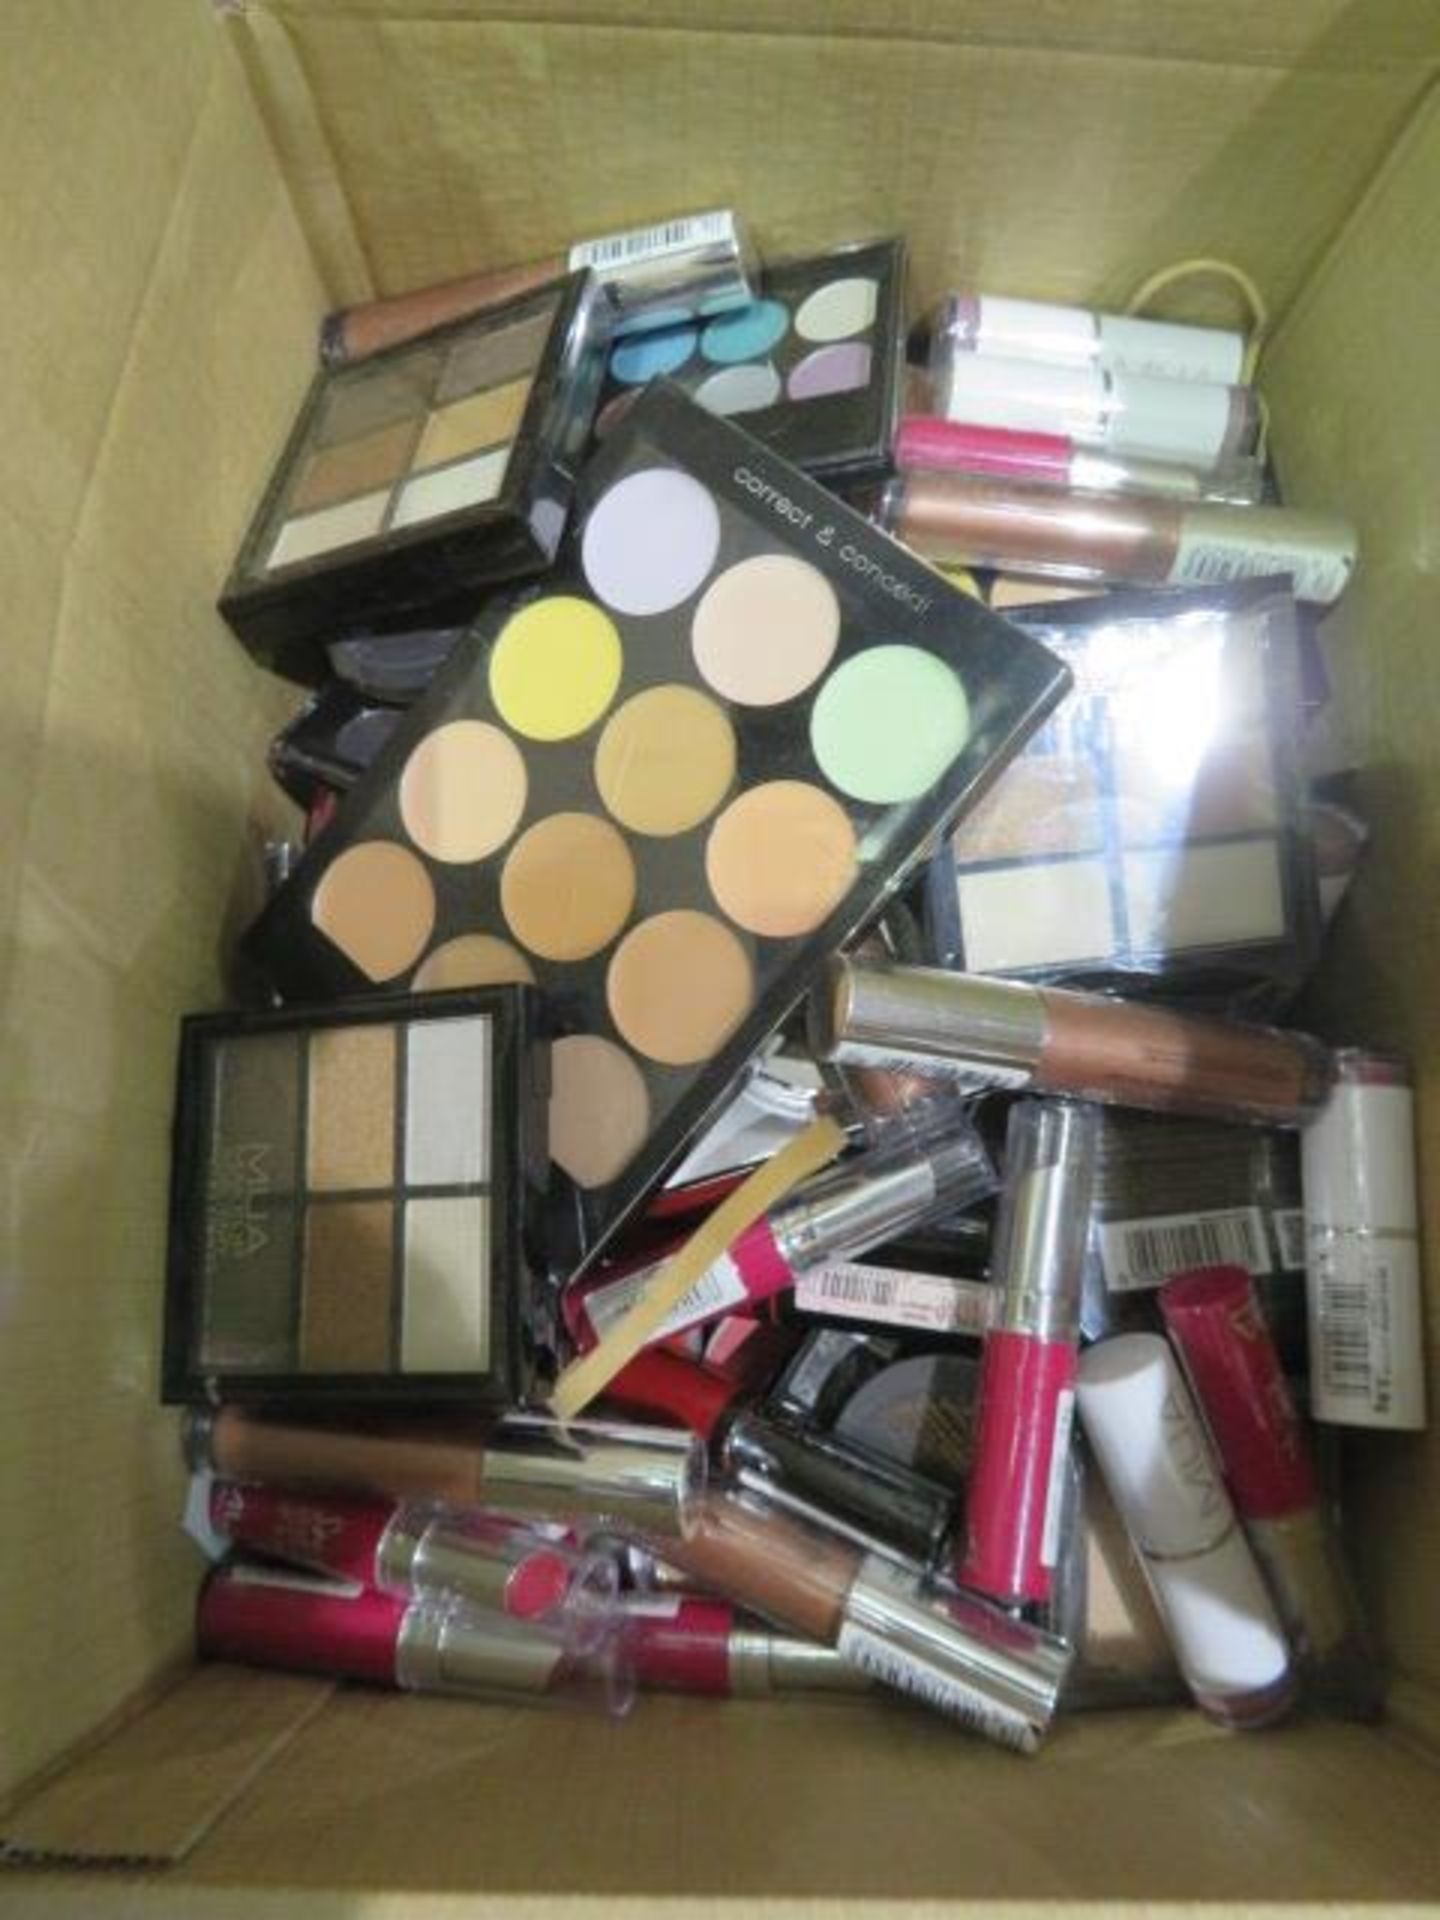 (Z26) Circa. 200 items of various new make up acadamy make up to include: sweet sheen lip balm,...